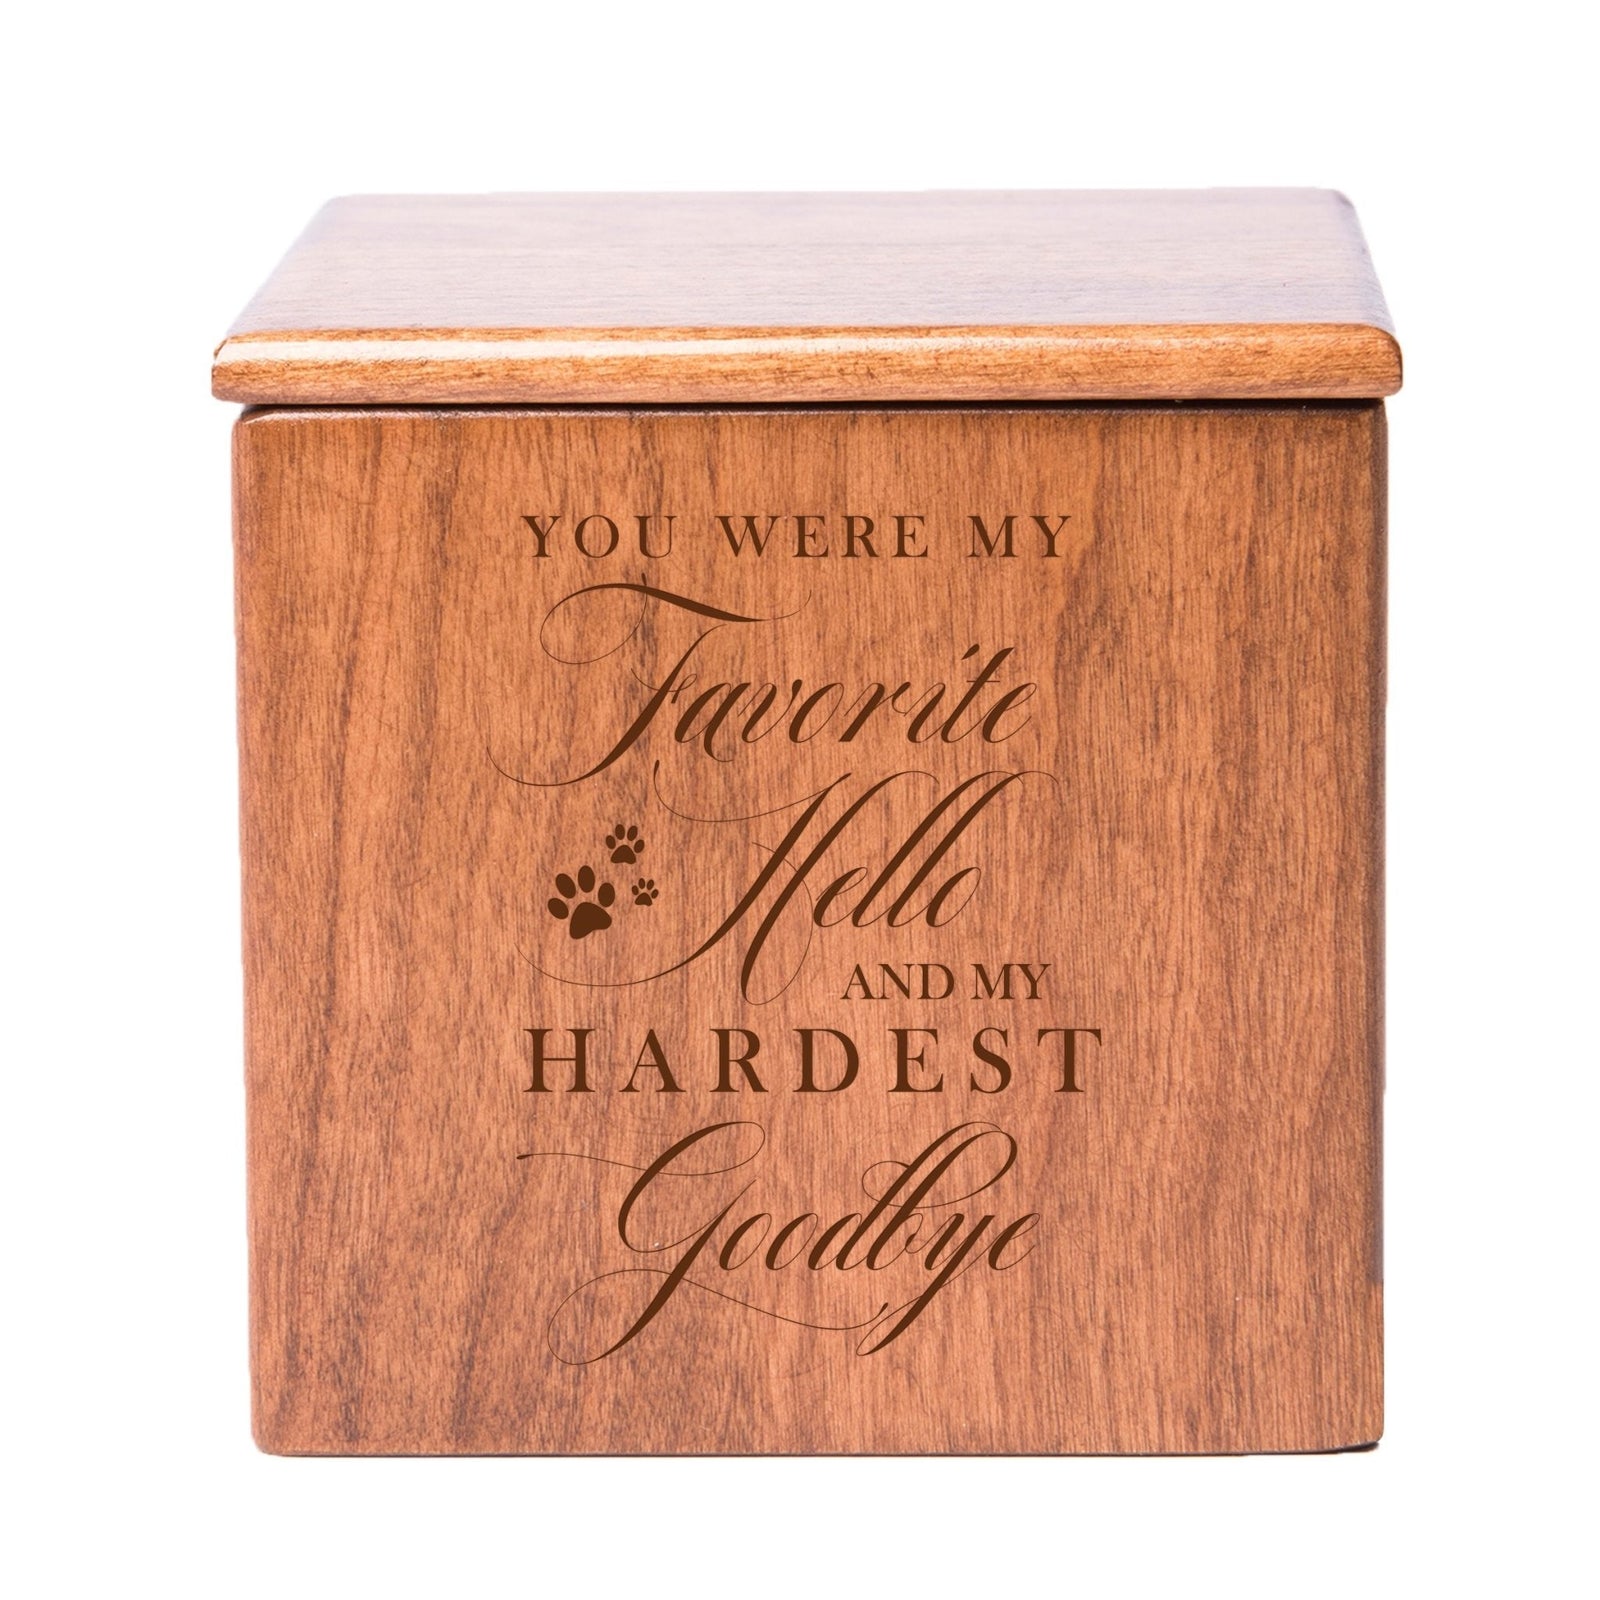 Pet Memorial Keepsake Cremation Urn Box for Dog or Cat - You Were My Favorite Hello - LifeSong Milestones